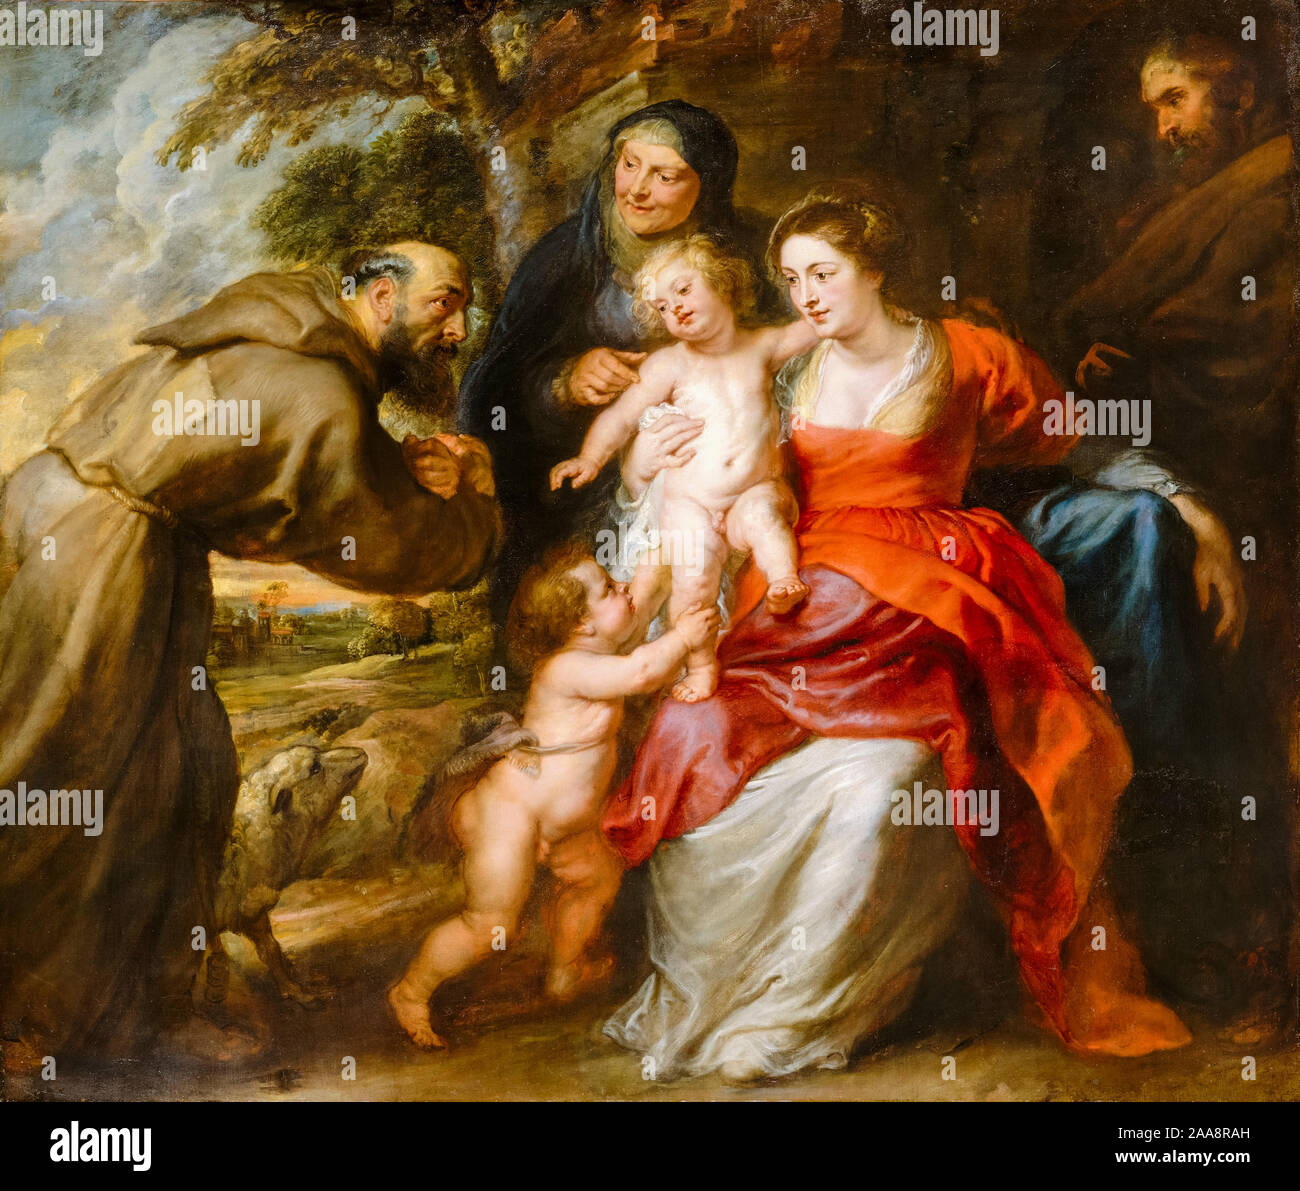 Peter Paul Rubens, The Holy Family with Saints Francis and Anne and the Infant Saint John the Baptist, painting, 1630-1635 Stock Photo